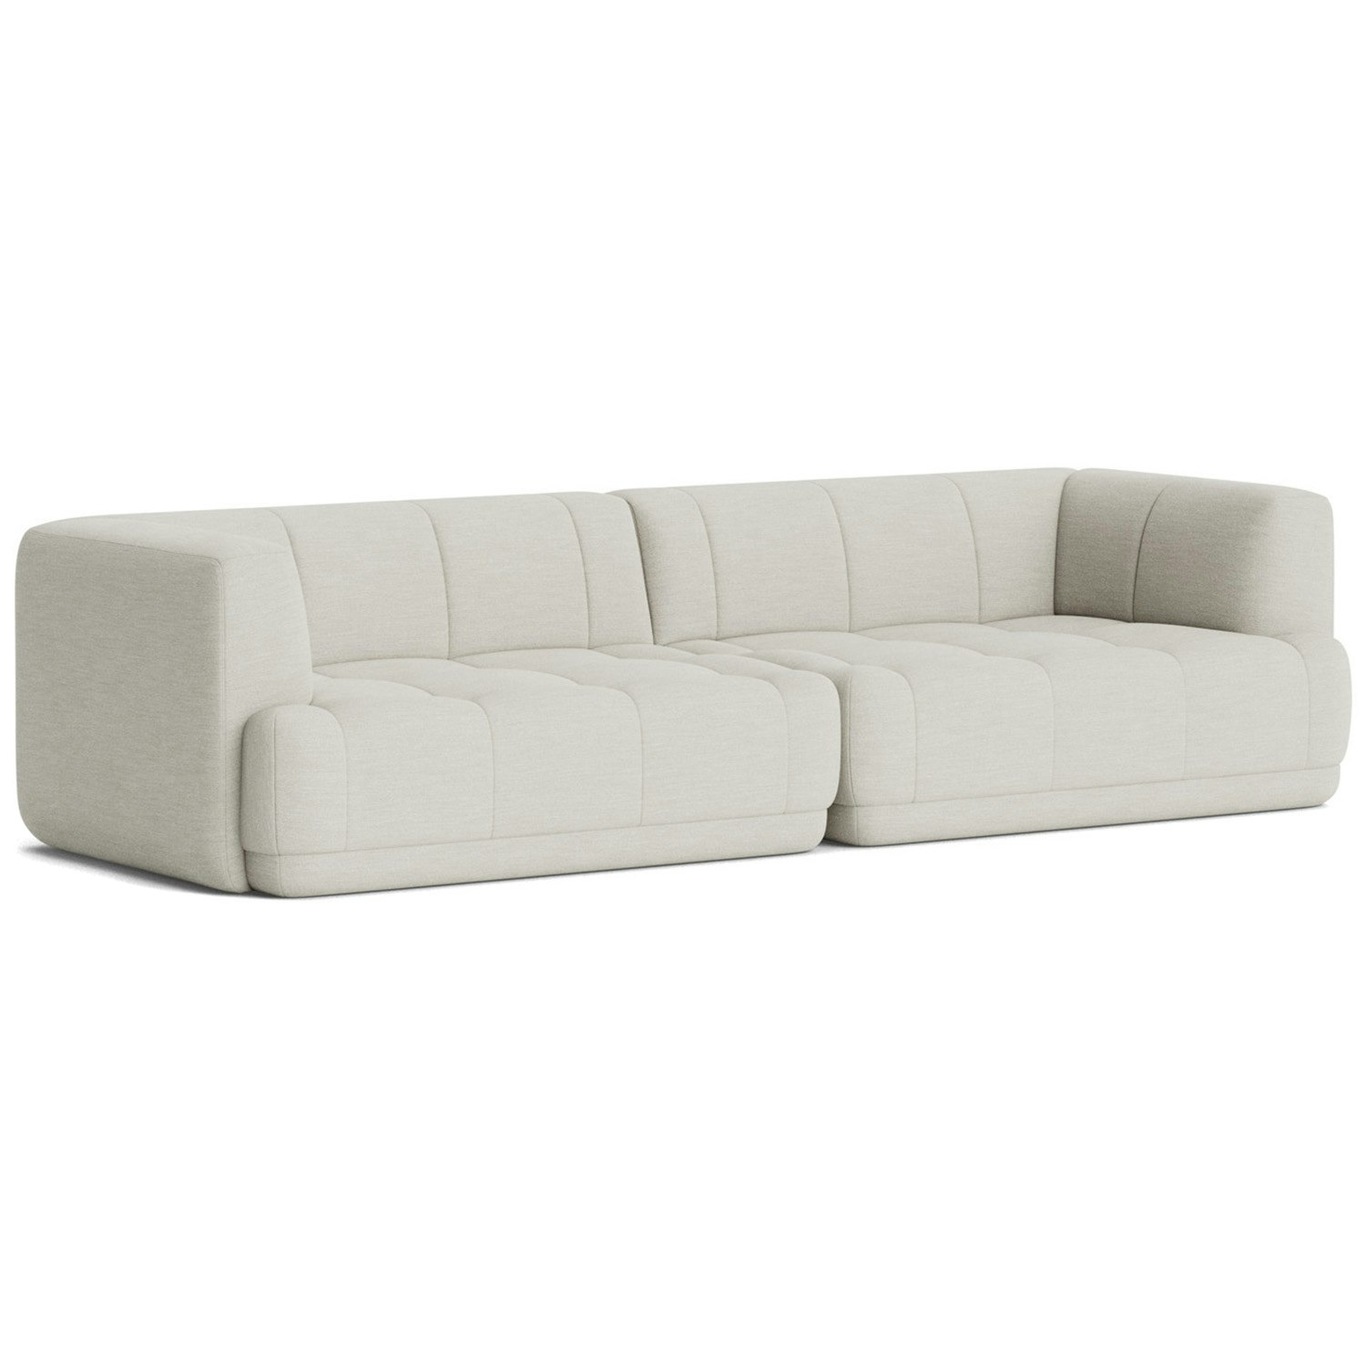 Quilton 3-Seater Sofa Configuration 1, Mode 009 Clavicle